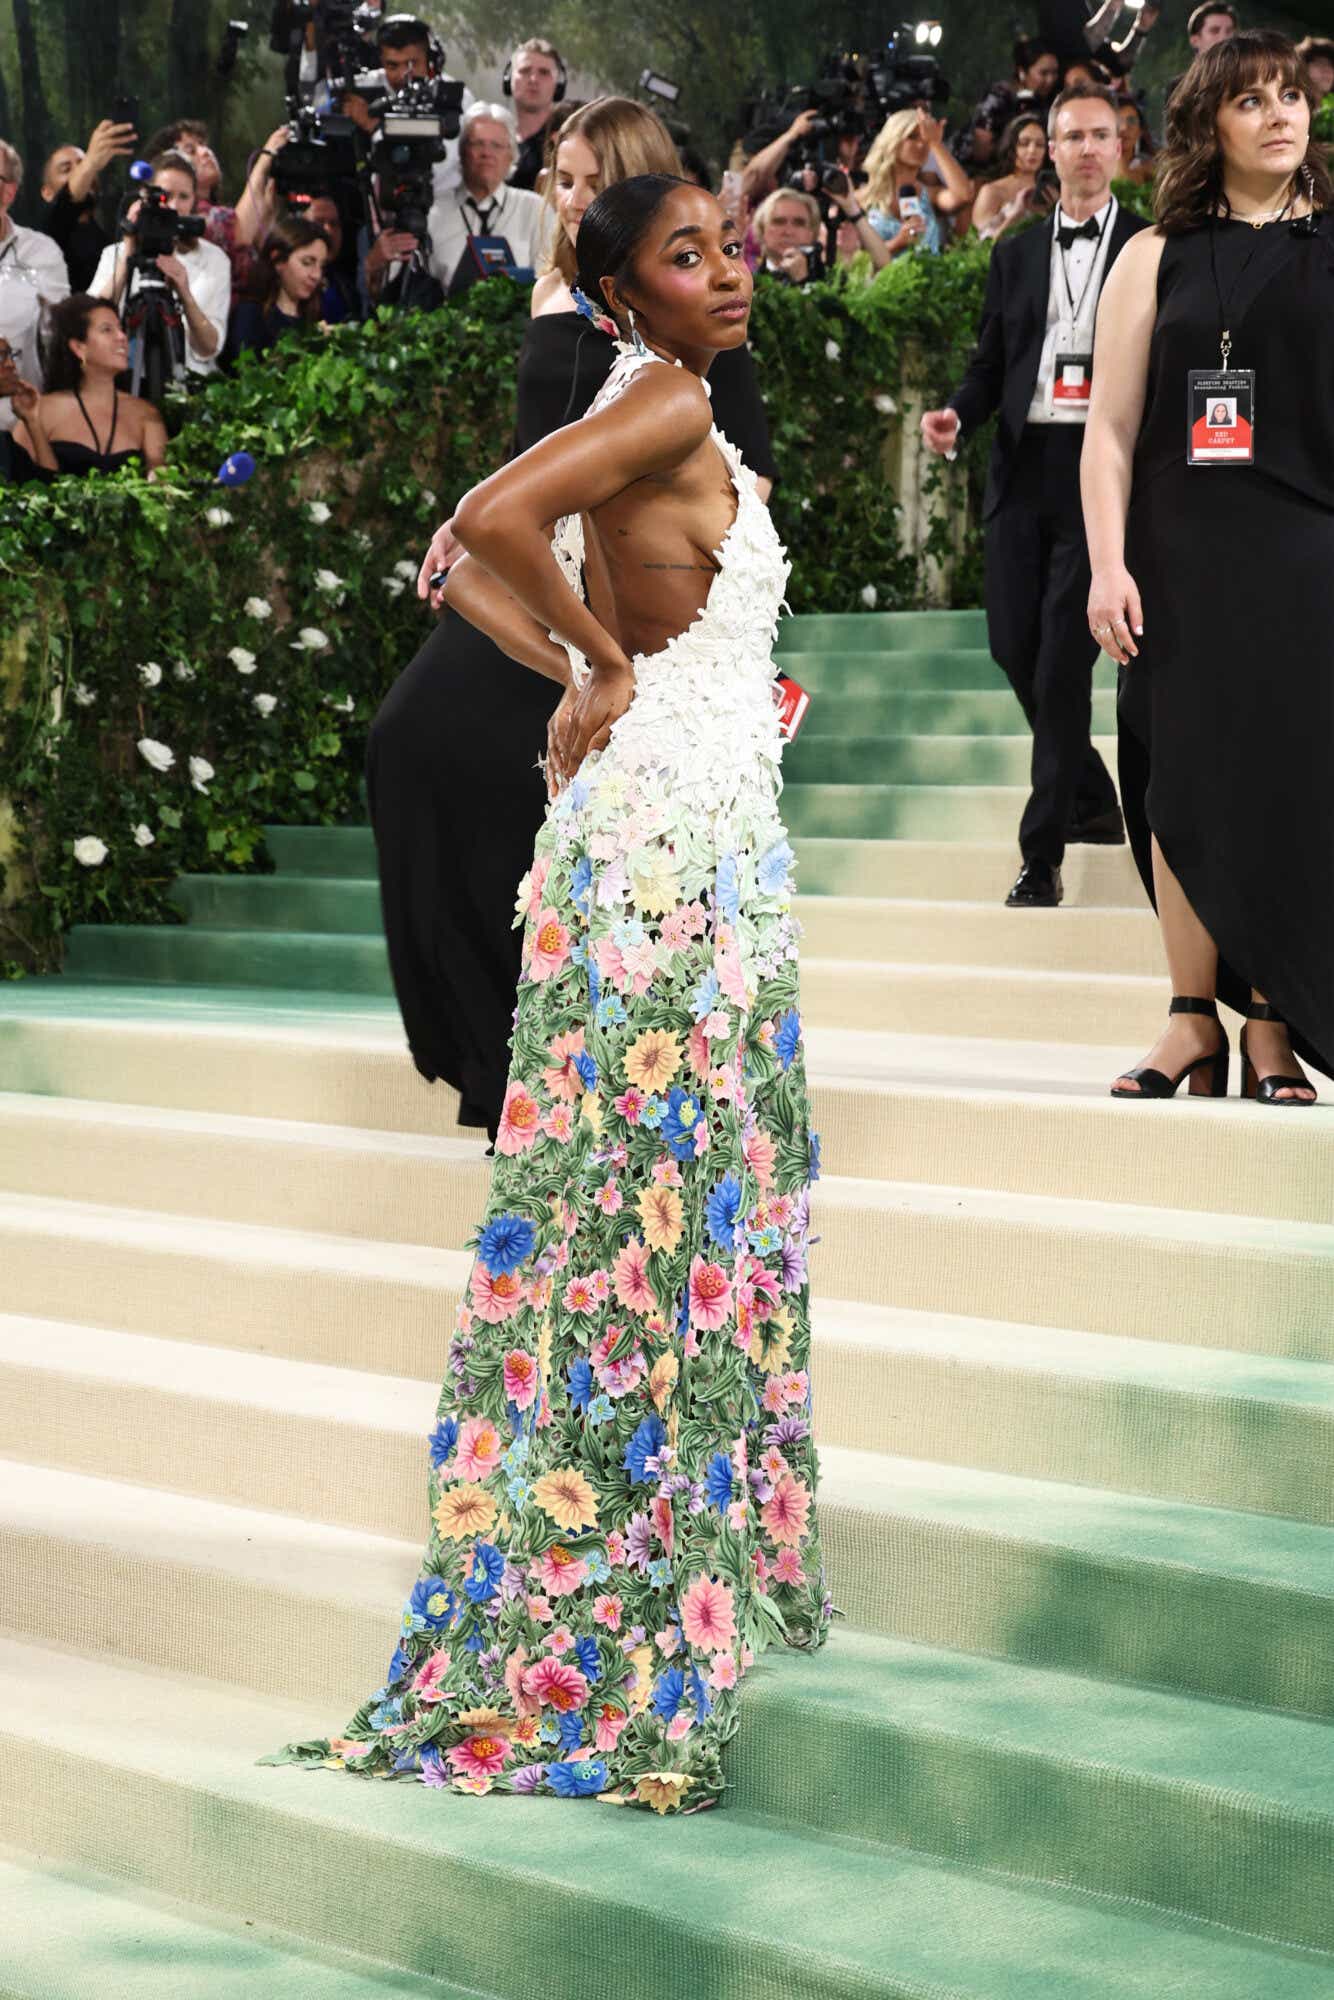 Ayo Edebiri wears a dress with floral appliques and a high neck. From the top it's white, towards the bottom the flowers are vibrant and multicolored.